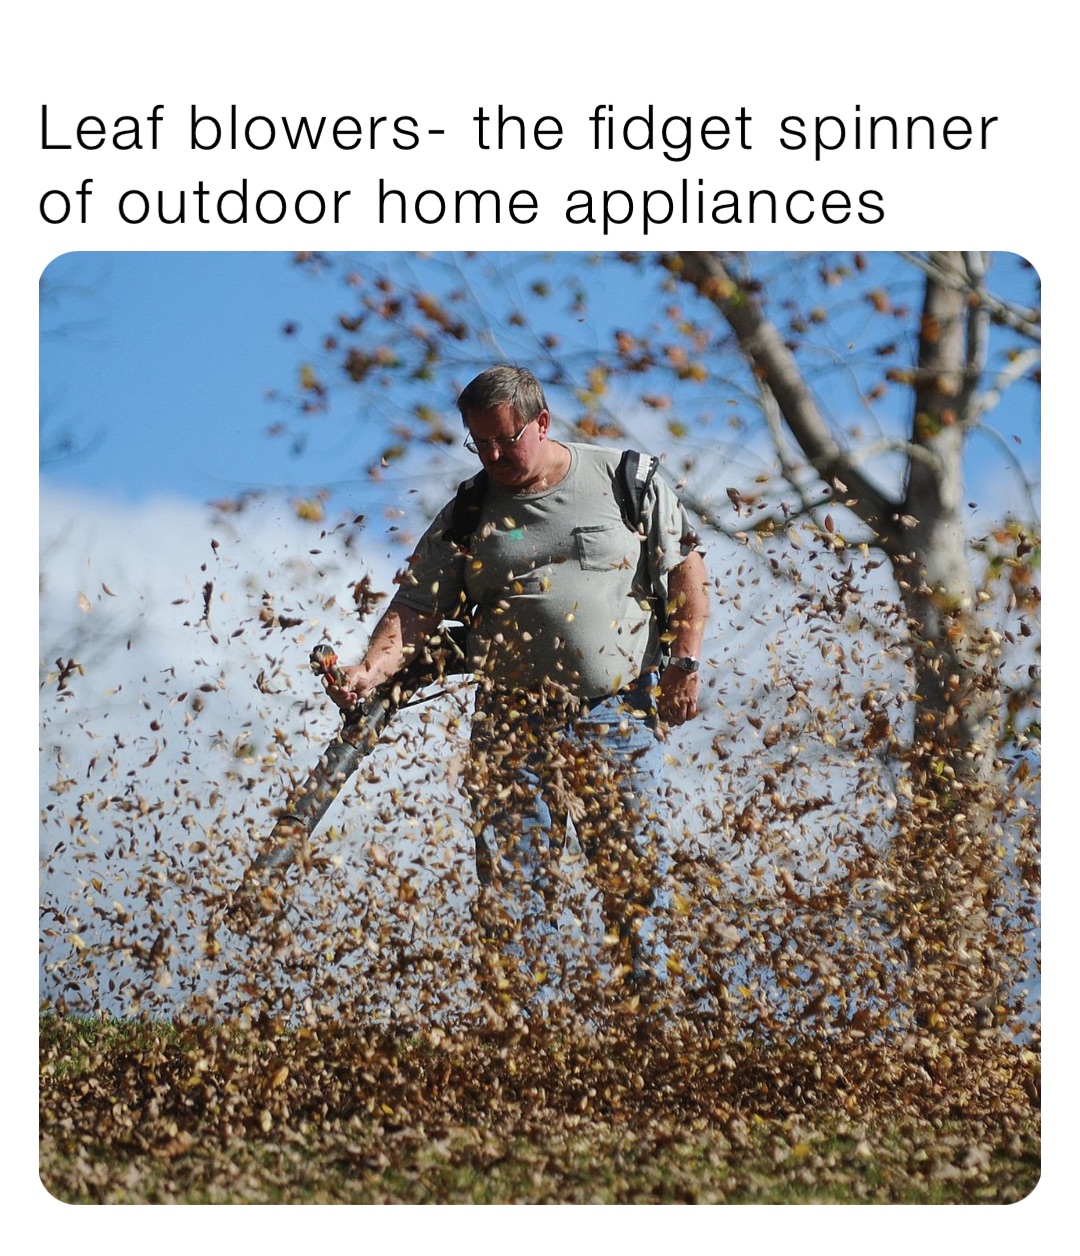 Leaf blowers- the fidget spinner of outdoor home appliances